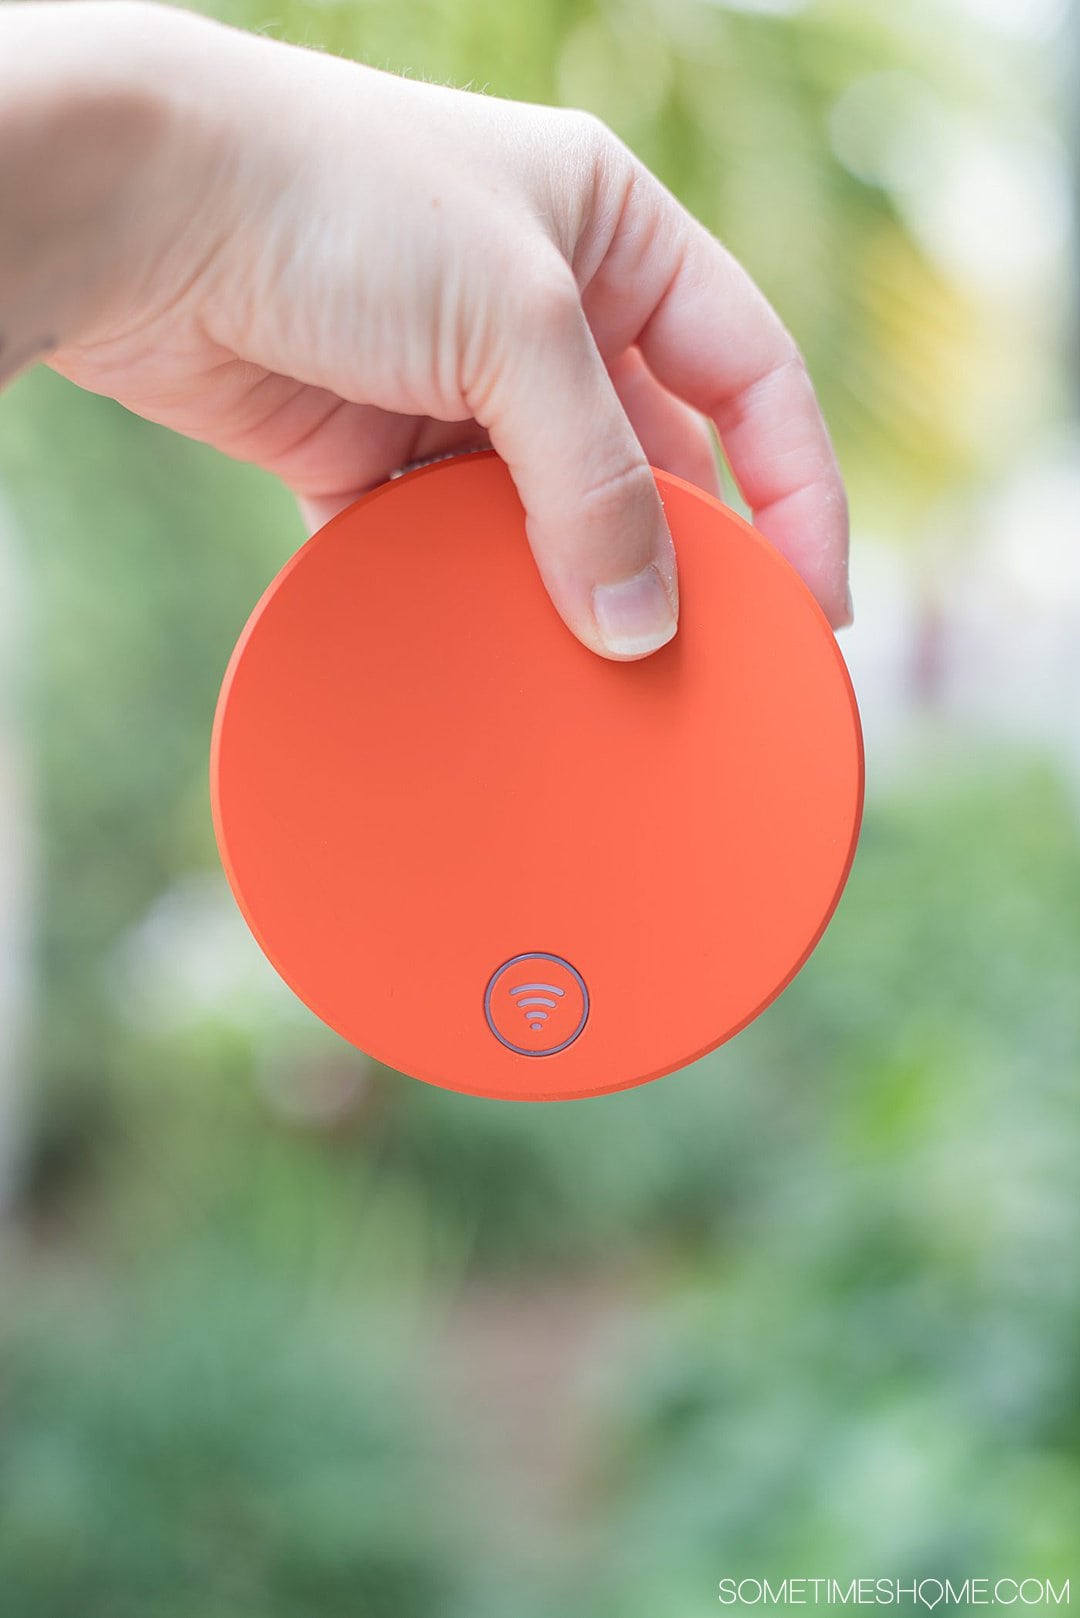 Portable travel wifi hotspot that will fit in clothes as a pocket wifi device on vacations! Skyroam is the best travel gift and essential technology for wanderlusters on the go. #skyroam #sometimeshome #wifihotspot #pocketwifi #traveltechnology